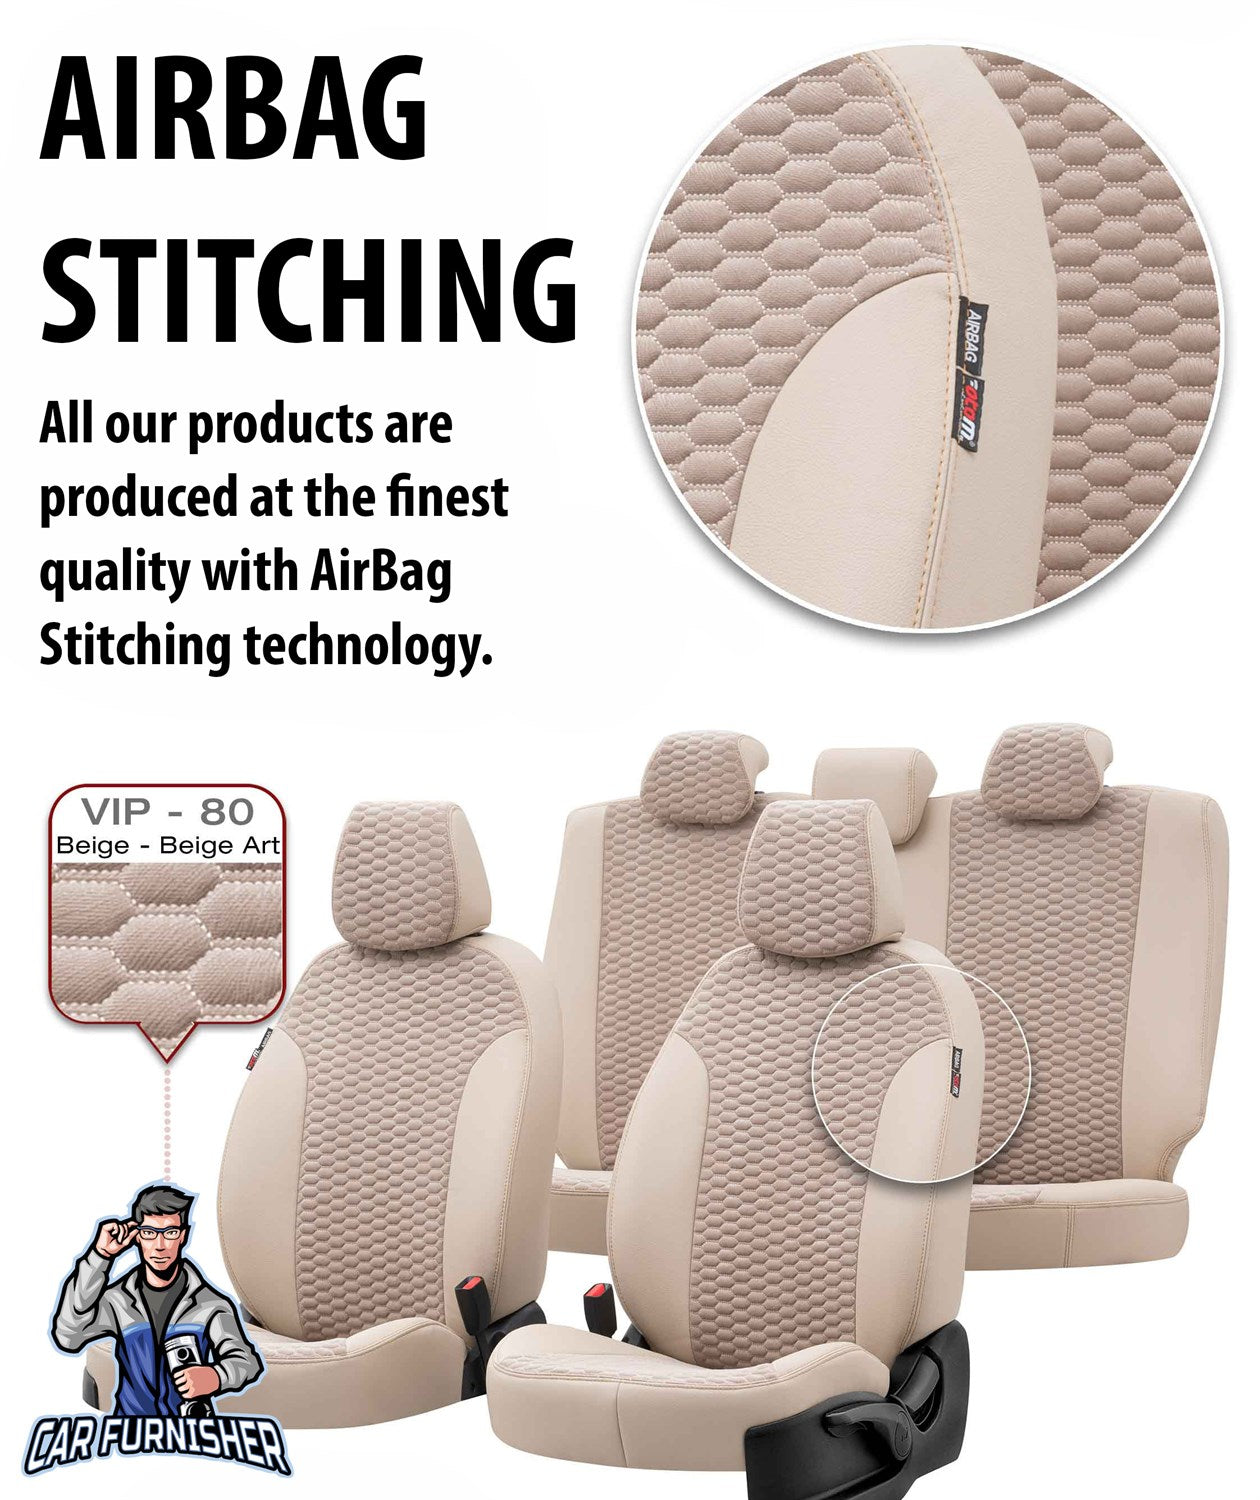 Isuzu Nlr Seat Covers Tokyo Foal Feather Design Beige Leather & Foal Feather